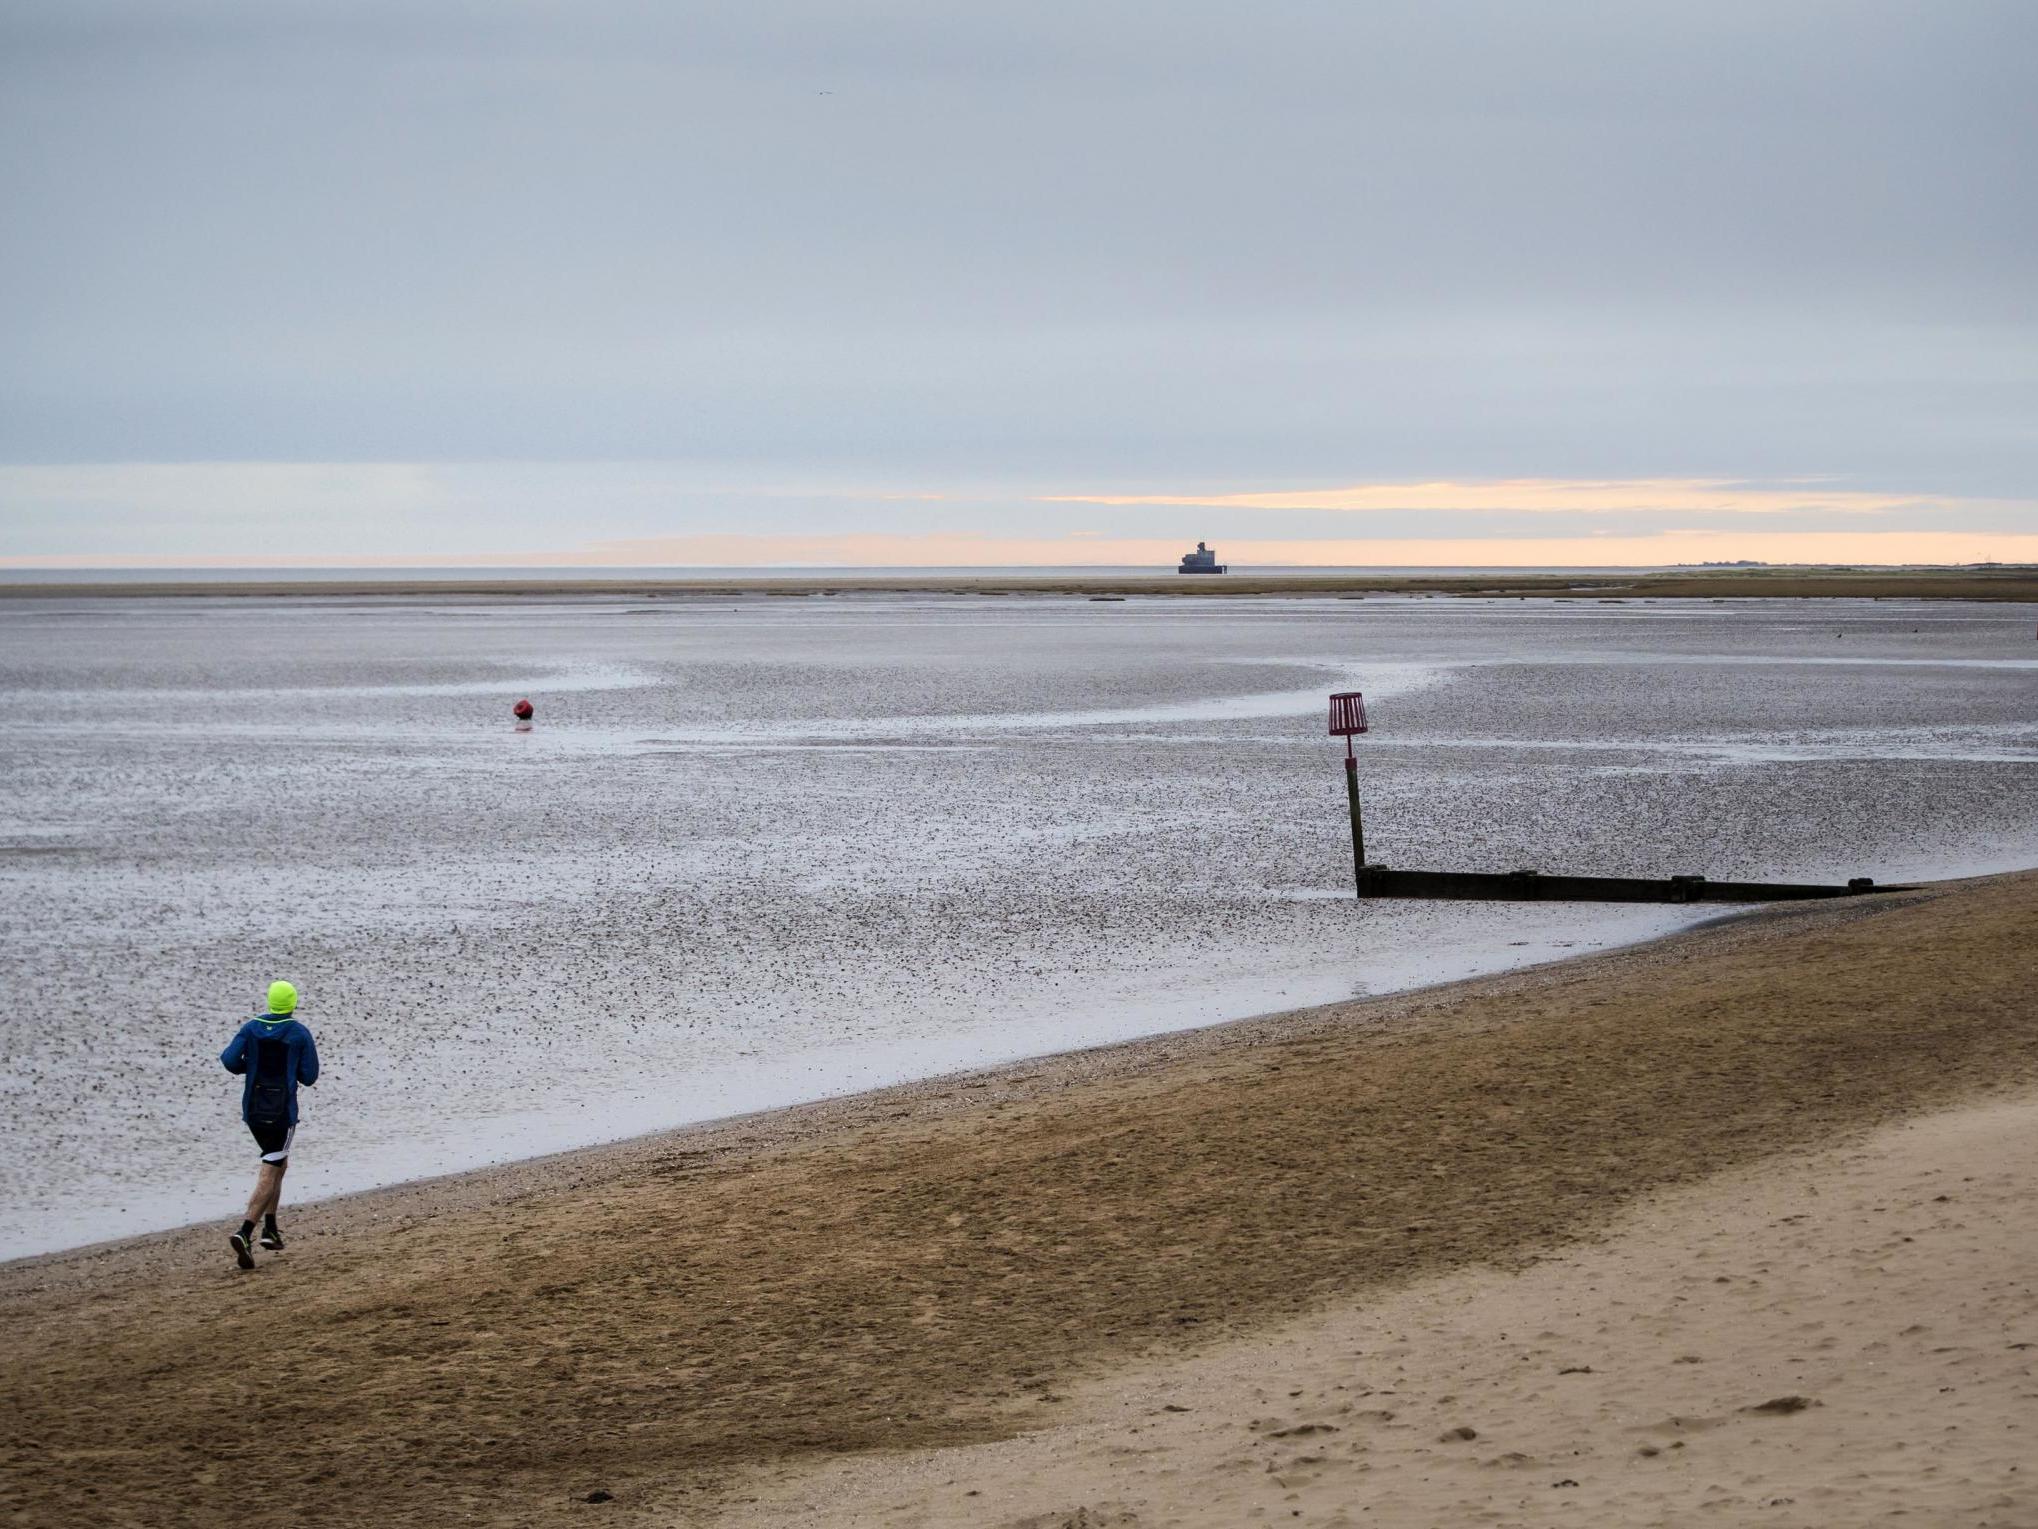 A man's body was found on Cleethorpes beach, northeast Lincolnshire